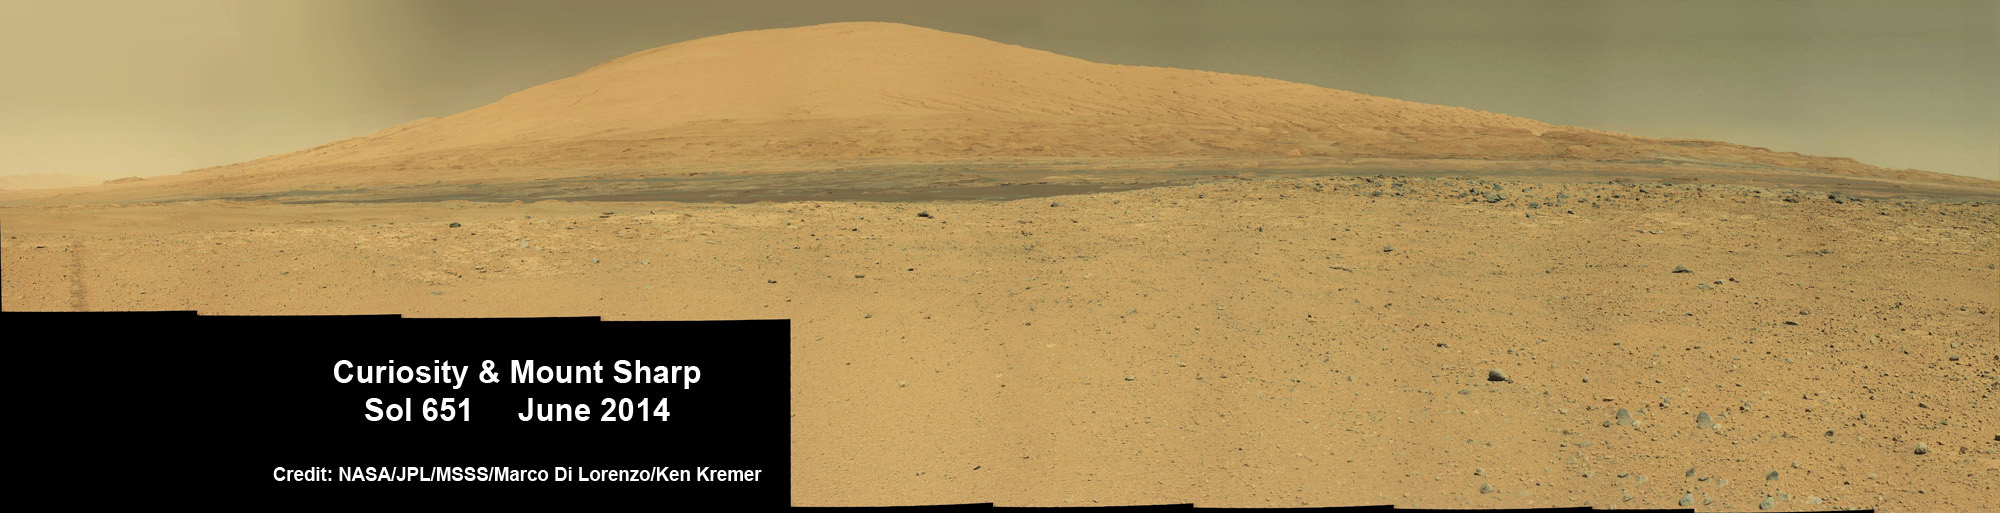 Curiosity rover panorama of Mount Sharp captured on June 6, 2014 (Sol 651) during traverse inside Gale Crater.  Note rover wheel tracks at left.  She will eventually ascend the mountain at the ‘Murray Buttes’ at right later this year. Assembled from Mastcam color camera raw images and stitched by Marco Di Lorenzo and Ken Kremer.   Credit:   NASA/JPL/MSSS/Marco Di Lorenzo/Ken Kremer-kenkremer.com 